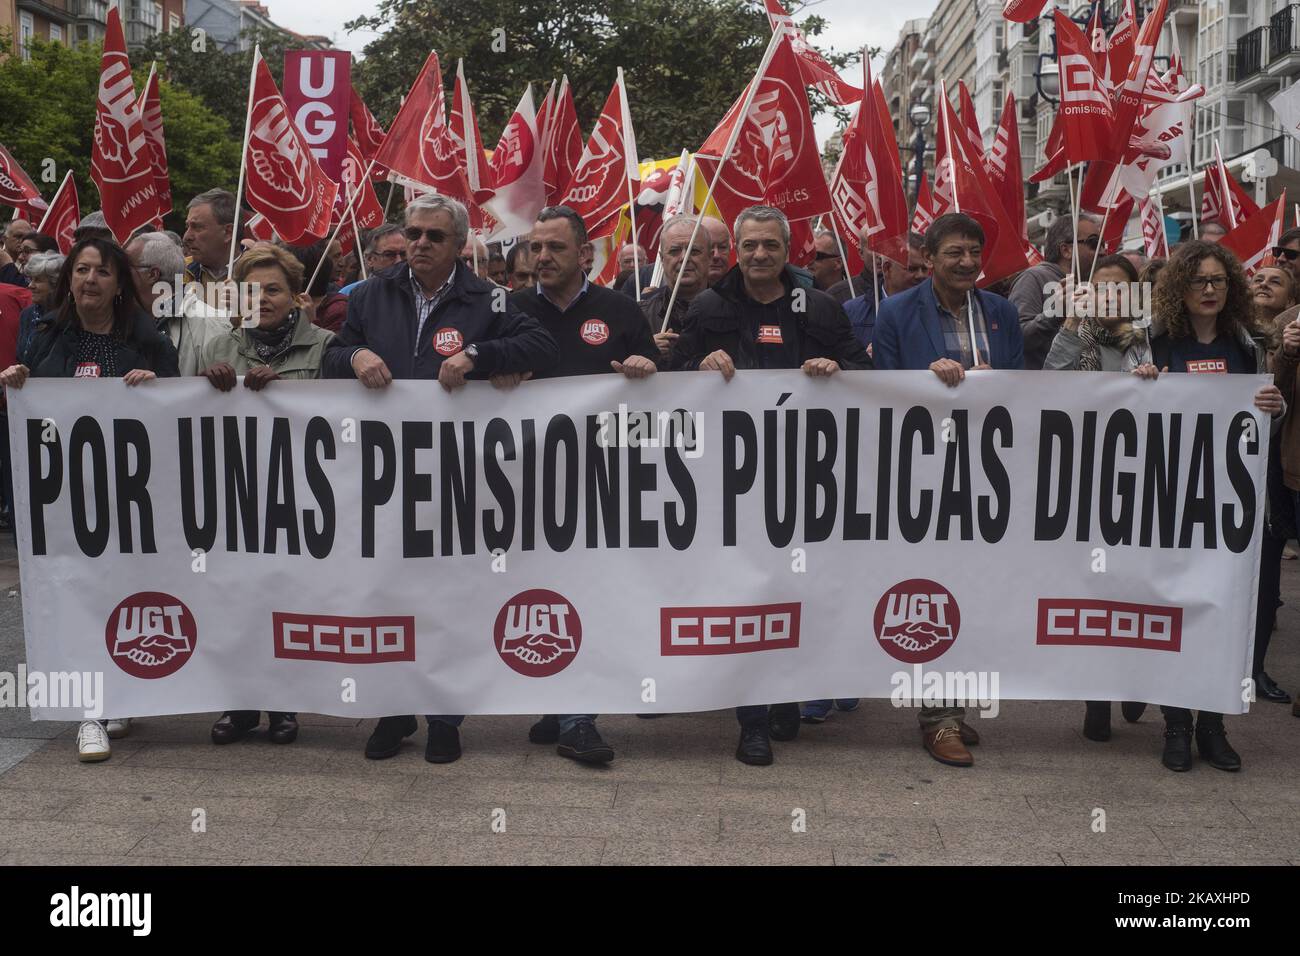 Demonstration for decent pensions convened by the majority unions CCOO and UGT in Santander, Spain, on April 15, 2018. More than a thousand people have supported this Sunday, protest and demonstration called by the federations of retirees and pensioners of UGT and CCOO in Cantabria in defense of 'decent public pensions.' The march is the second one since last year when unions began the mobilizations for a 'decent pensions' between the Plaza Numancia and the Pereda Gardens. (Photo by Joaquin Gomez Sastre/NurPhoto) Stock Photo